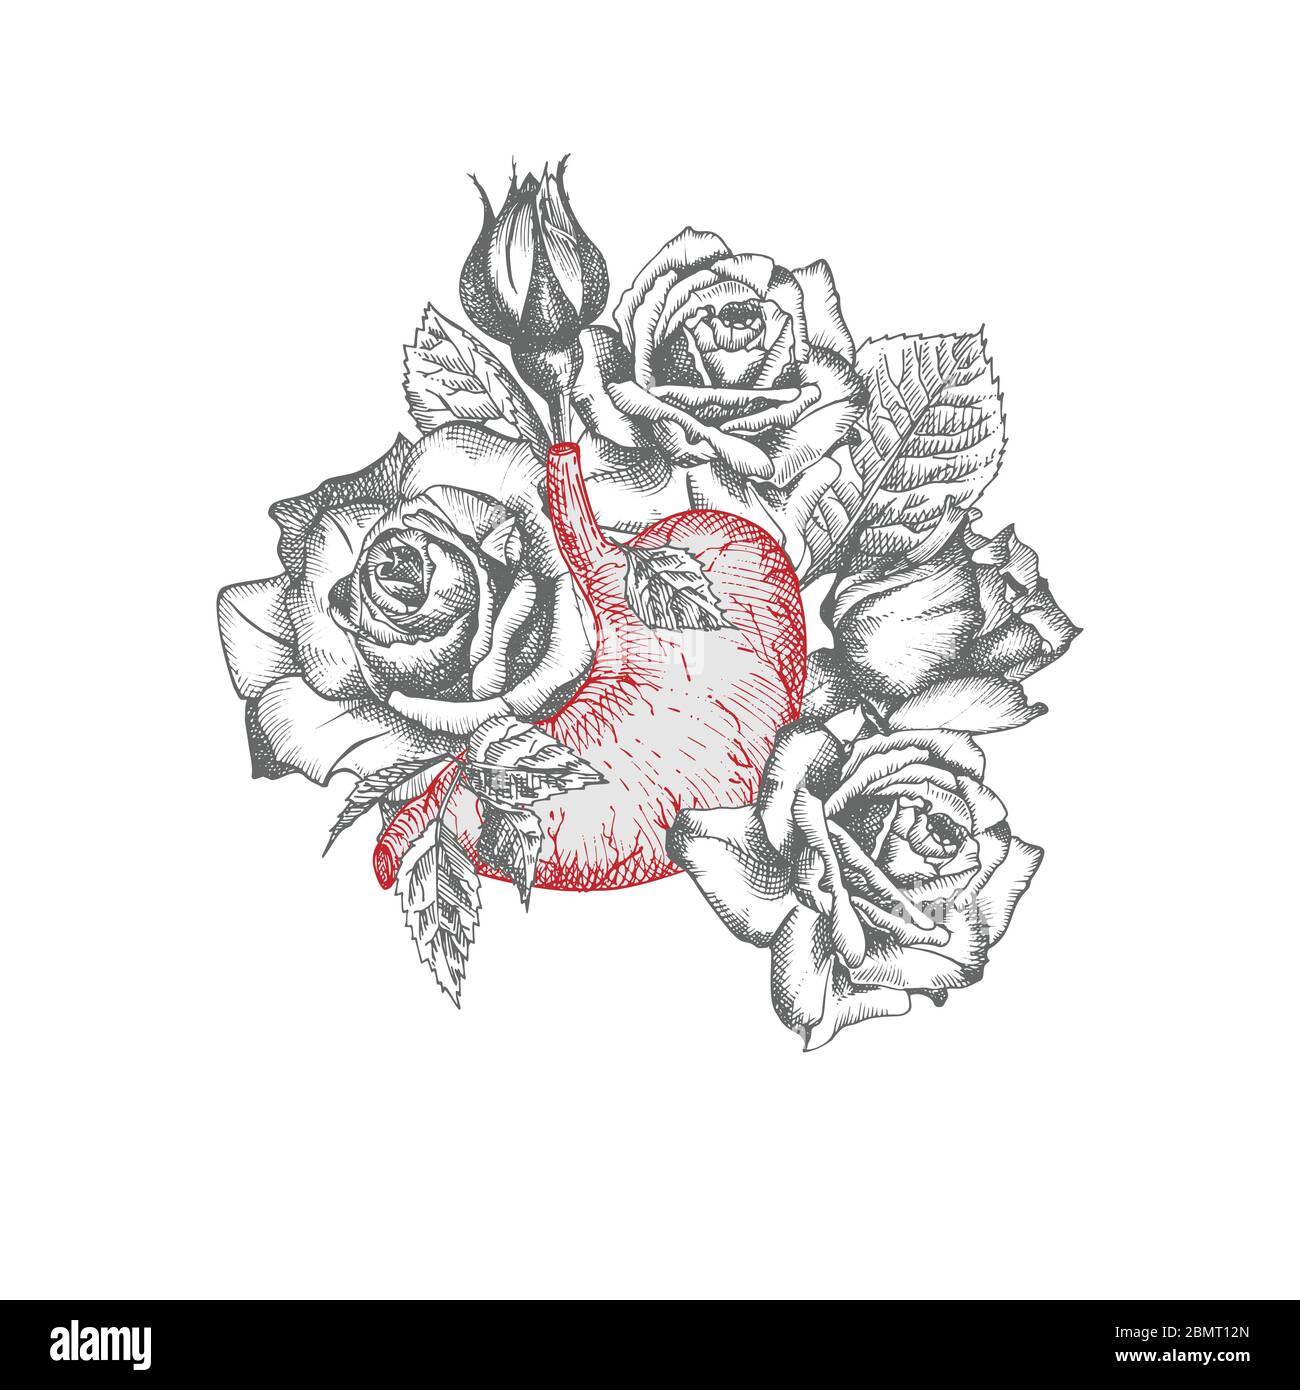 Unleash Your Inner Artist with These Inspiring Rose Tattoo Designs   Bookink